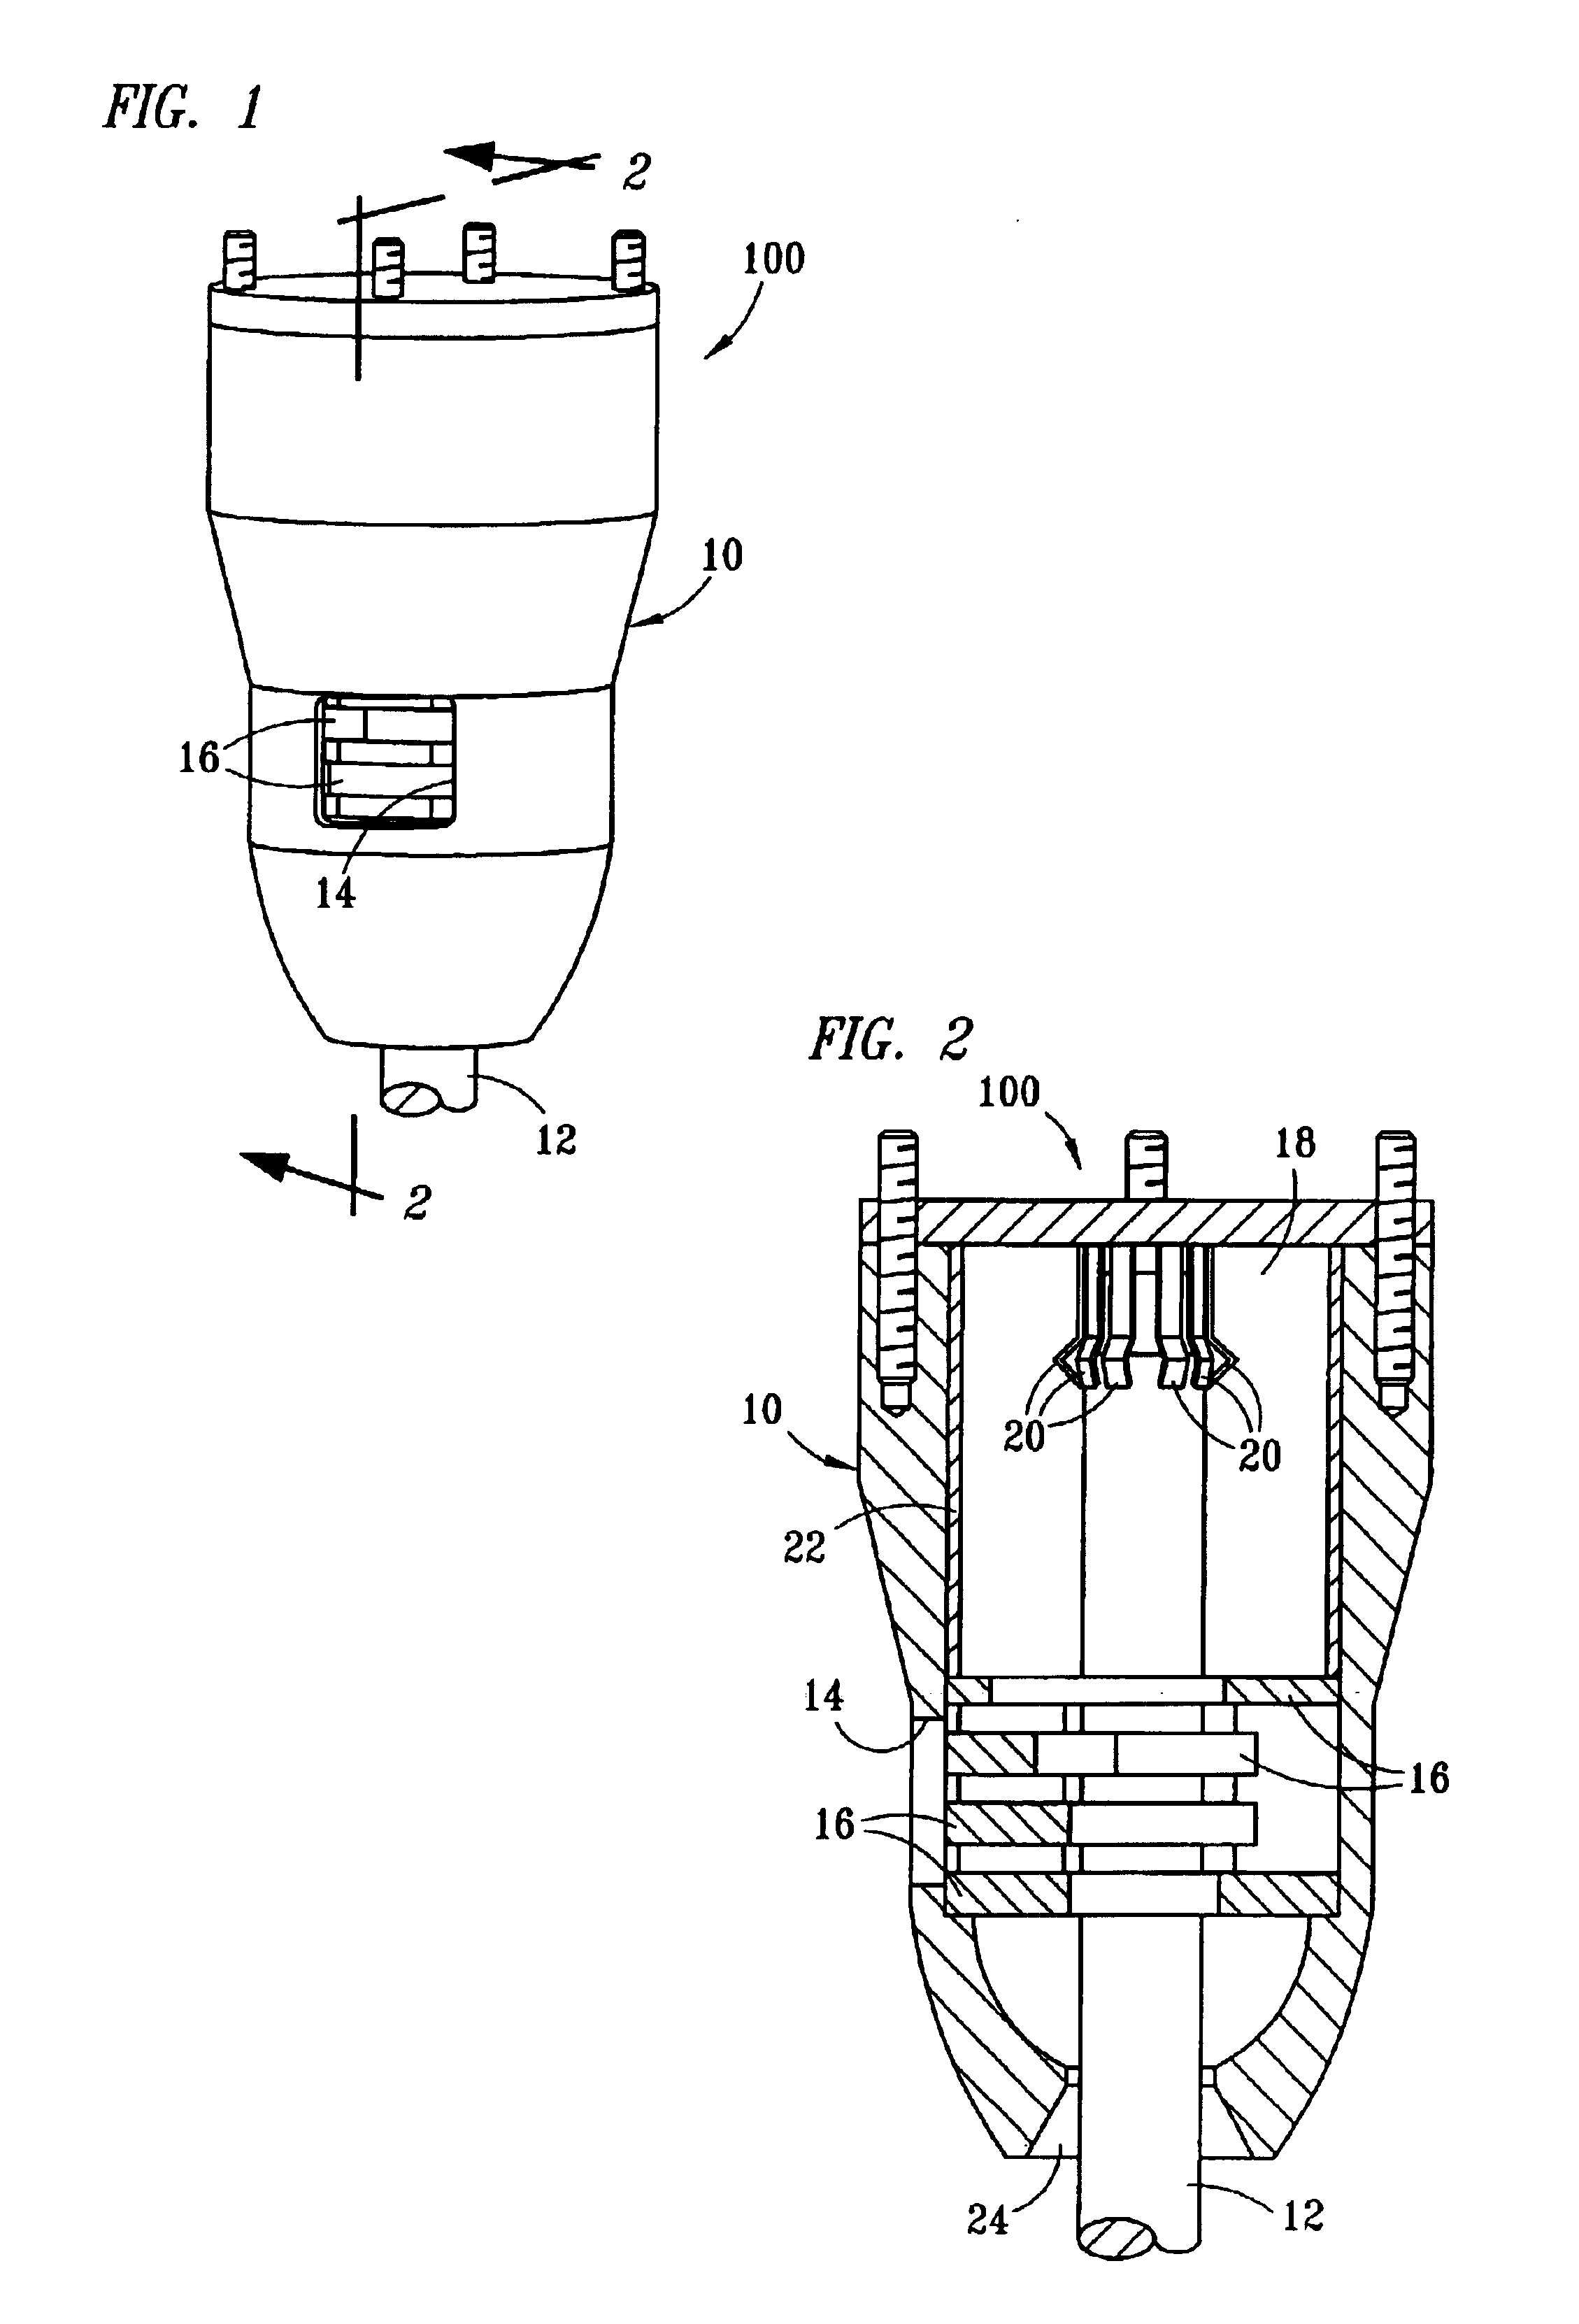 Method and apparatus for determining electrical contact wear